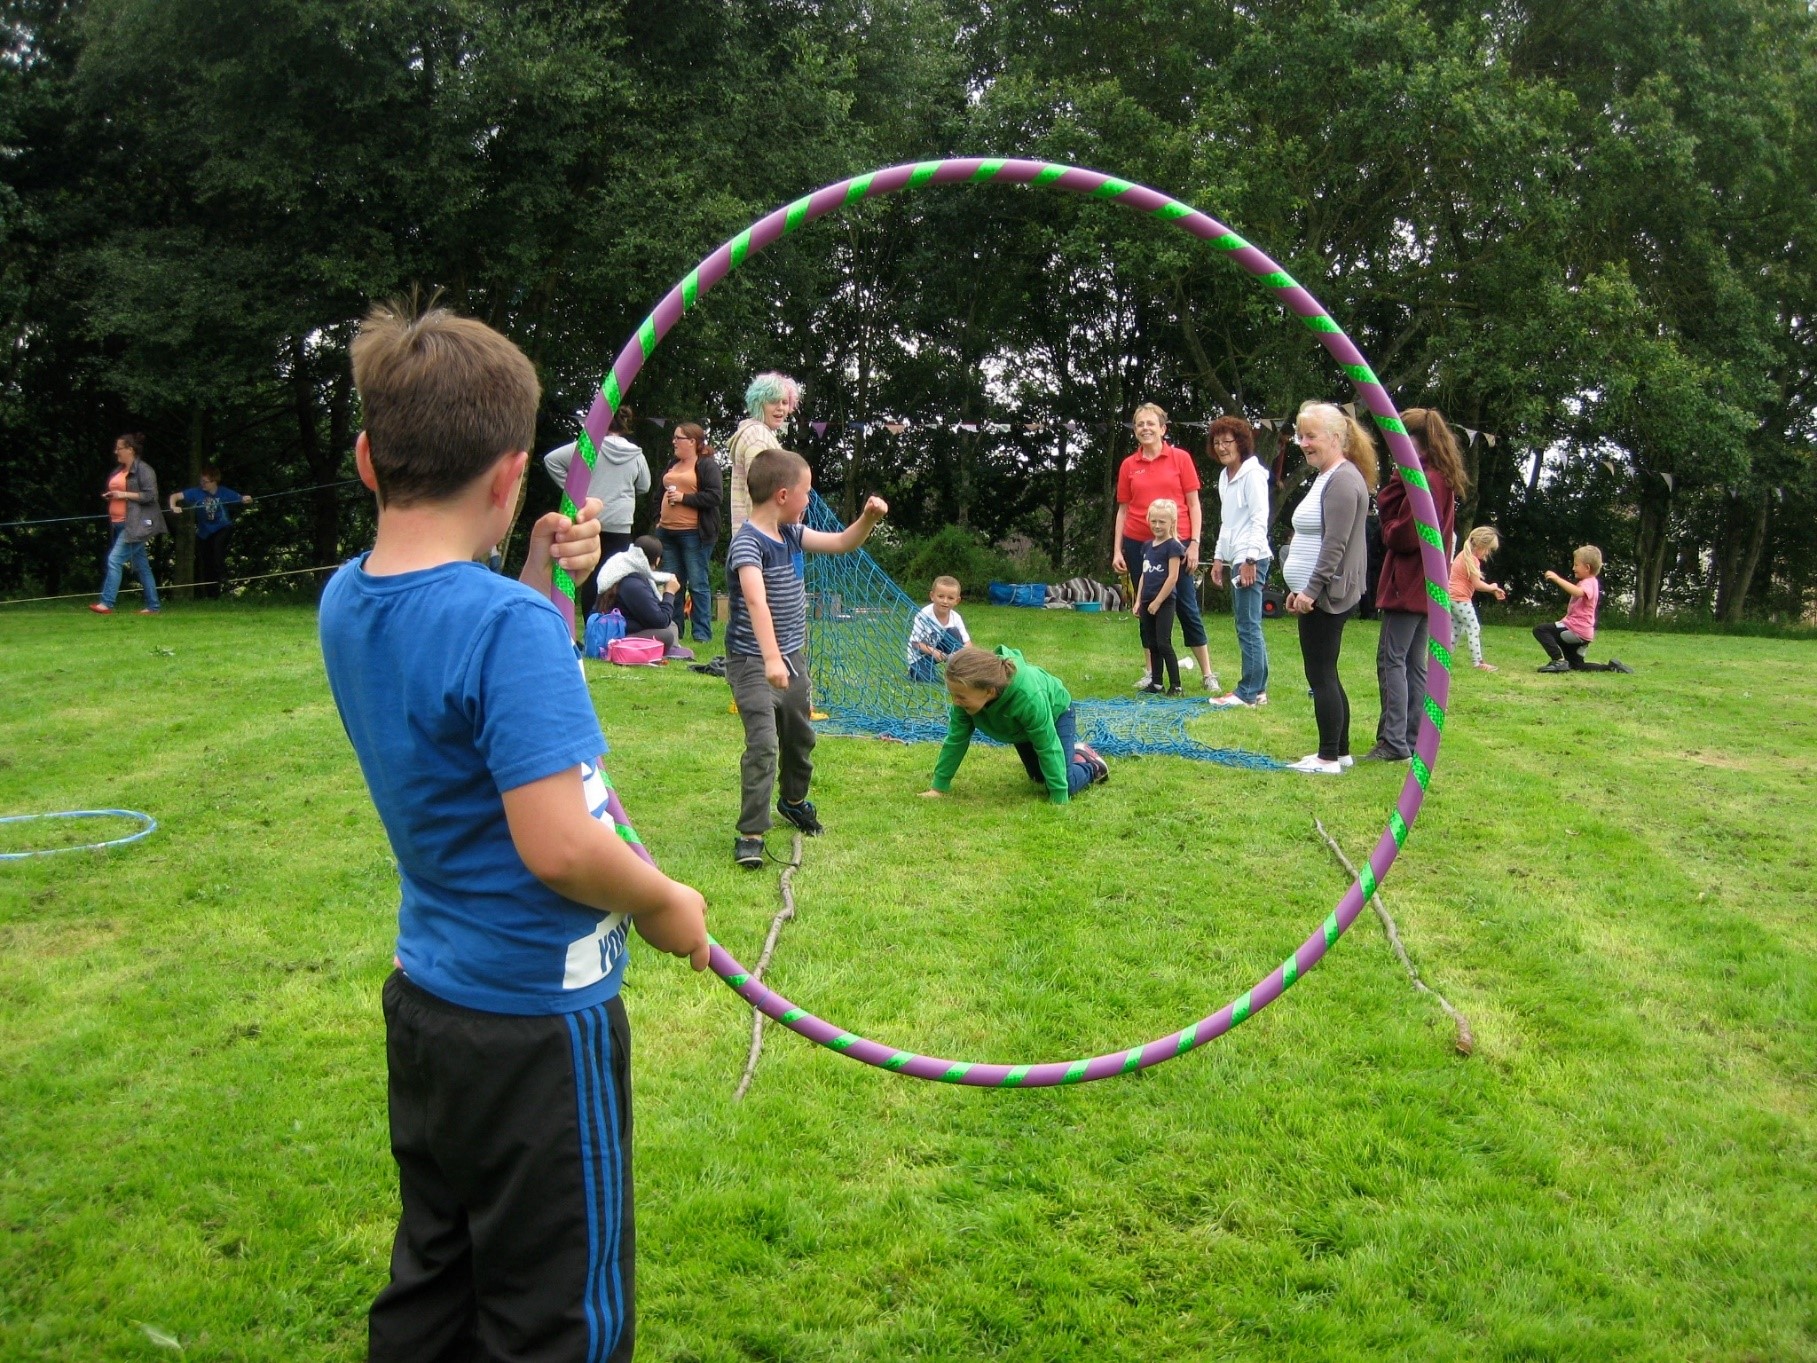 Image of children playing outdoors, one holding a hoop